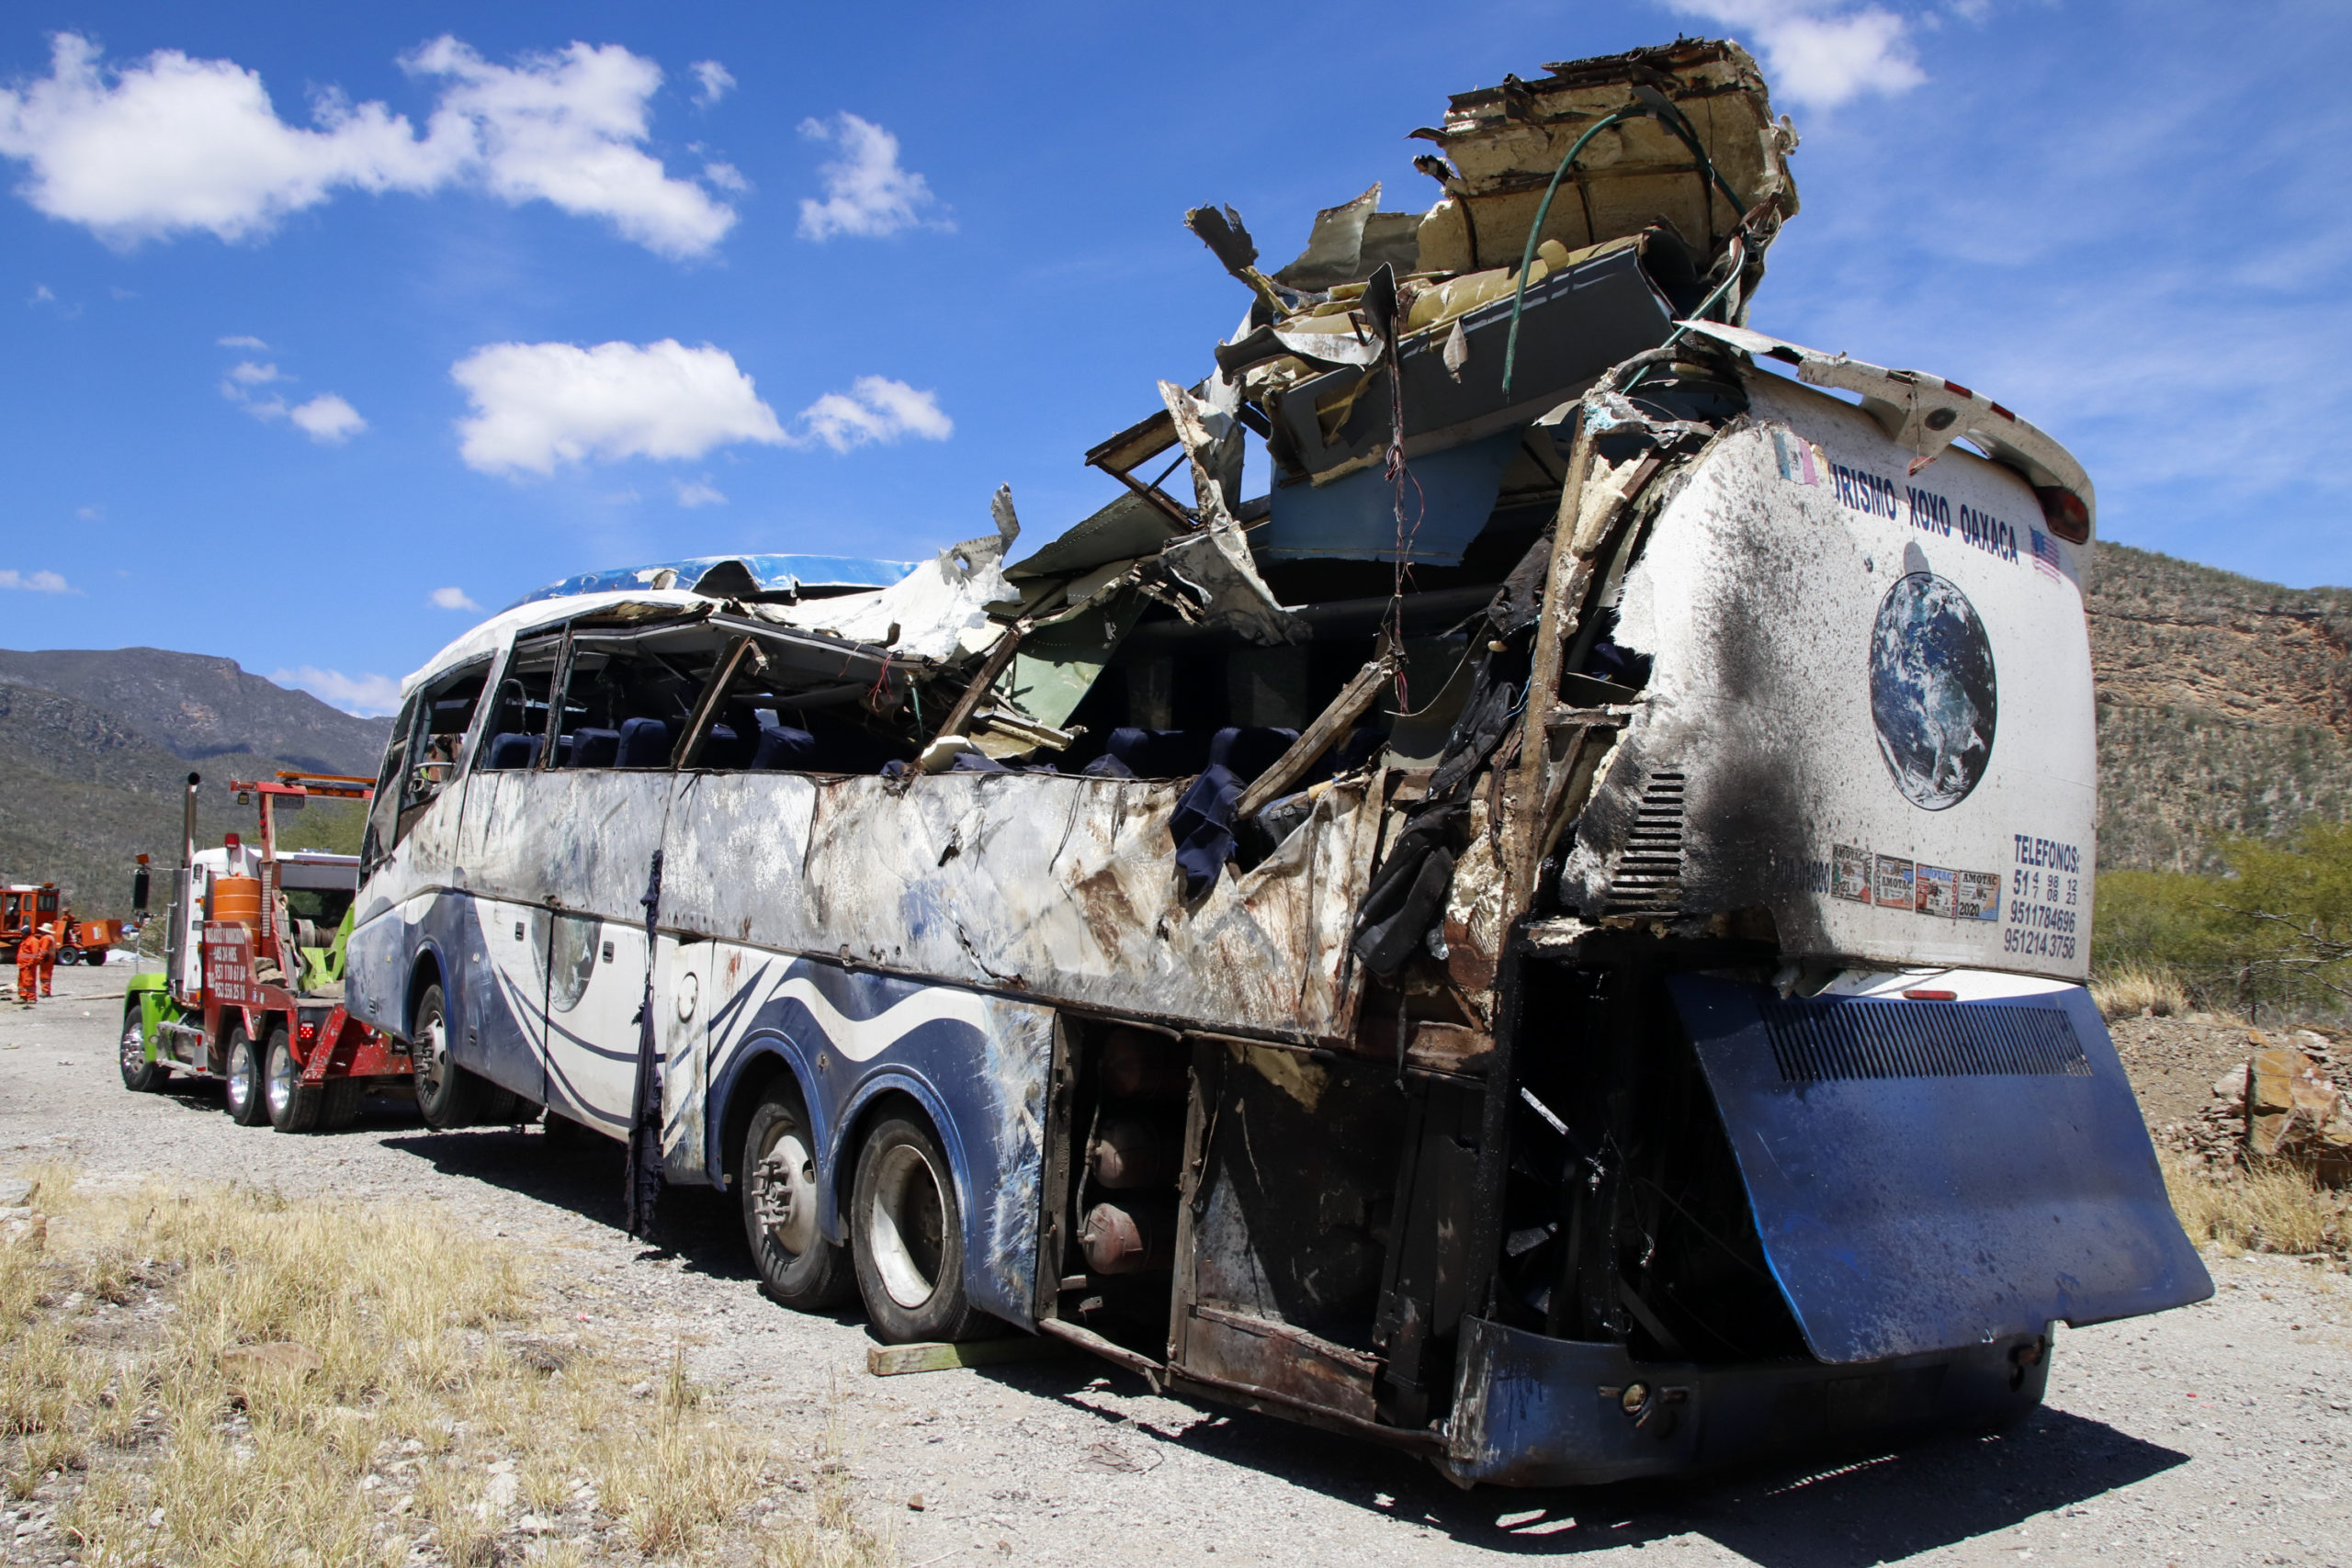 A bus involved in a deadly crash sits attached to a tow truck on the side of the road Friday near Tepelmeme, Oaxaca state, in Mexico.